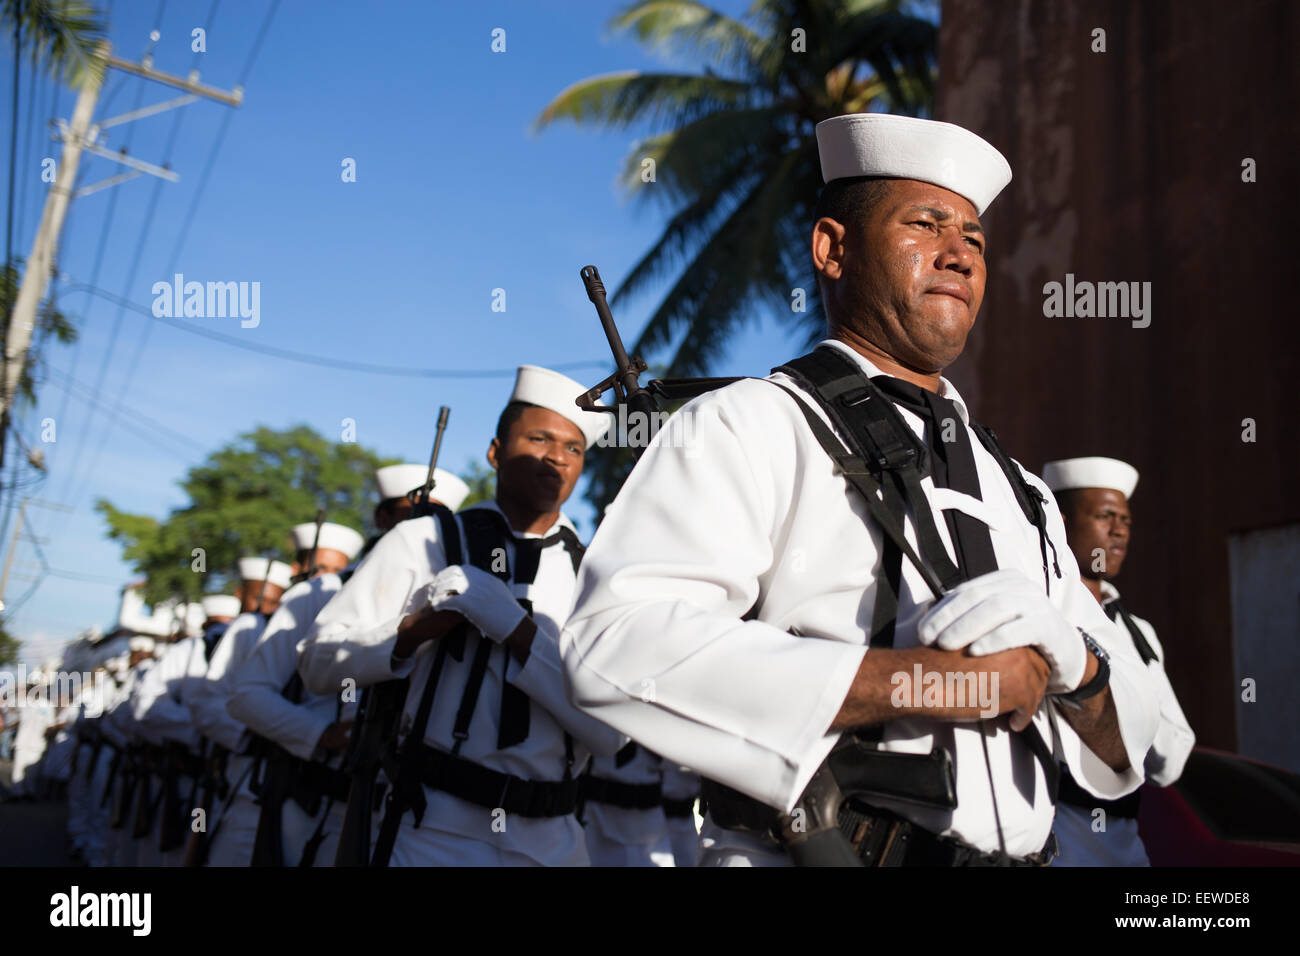 Santo Domingo, Dominican Republic. 21st Jan, 2015. Members of the Dominican Army take part in a procession in honor of the Virgin of Altagracia, considered as the protector of the Dominican people, in Santo Domingo, Dominican Republic, on Jan. 21, 2015. Devotees celebrated on Wednesday the 92nd anniversary of the coronation of the Virgin of Altagracia with the traditional procession headed by the papal nuncio Jude Thaddeus Okolo, who walk several blocks of the Colonial Zone of Santo Domingo to the Altagracia Parish. © Fran Afonso/Xinhua/Alamy Live News Stock Photo